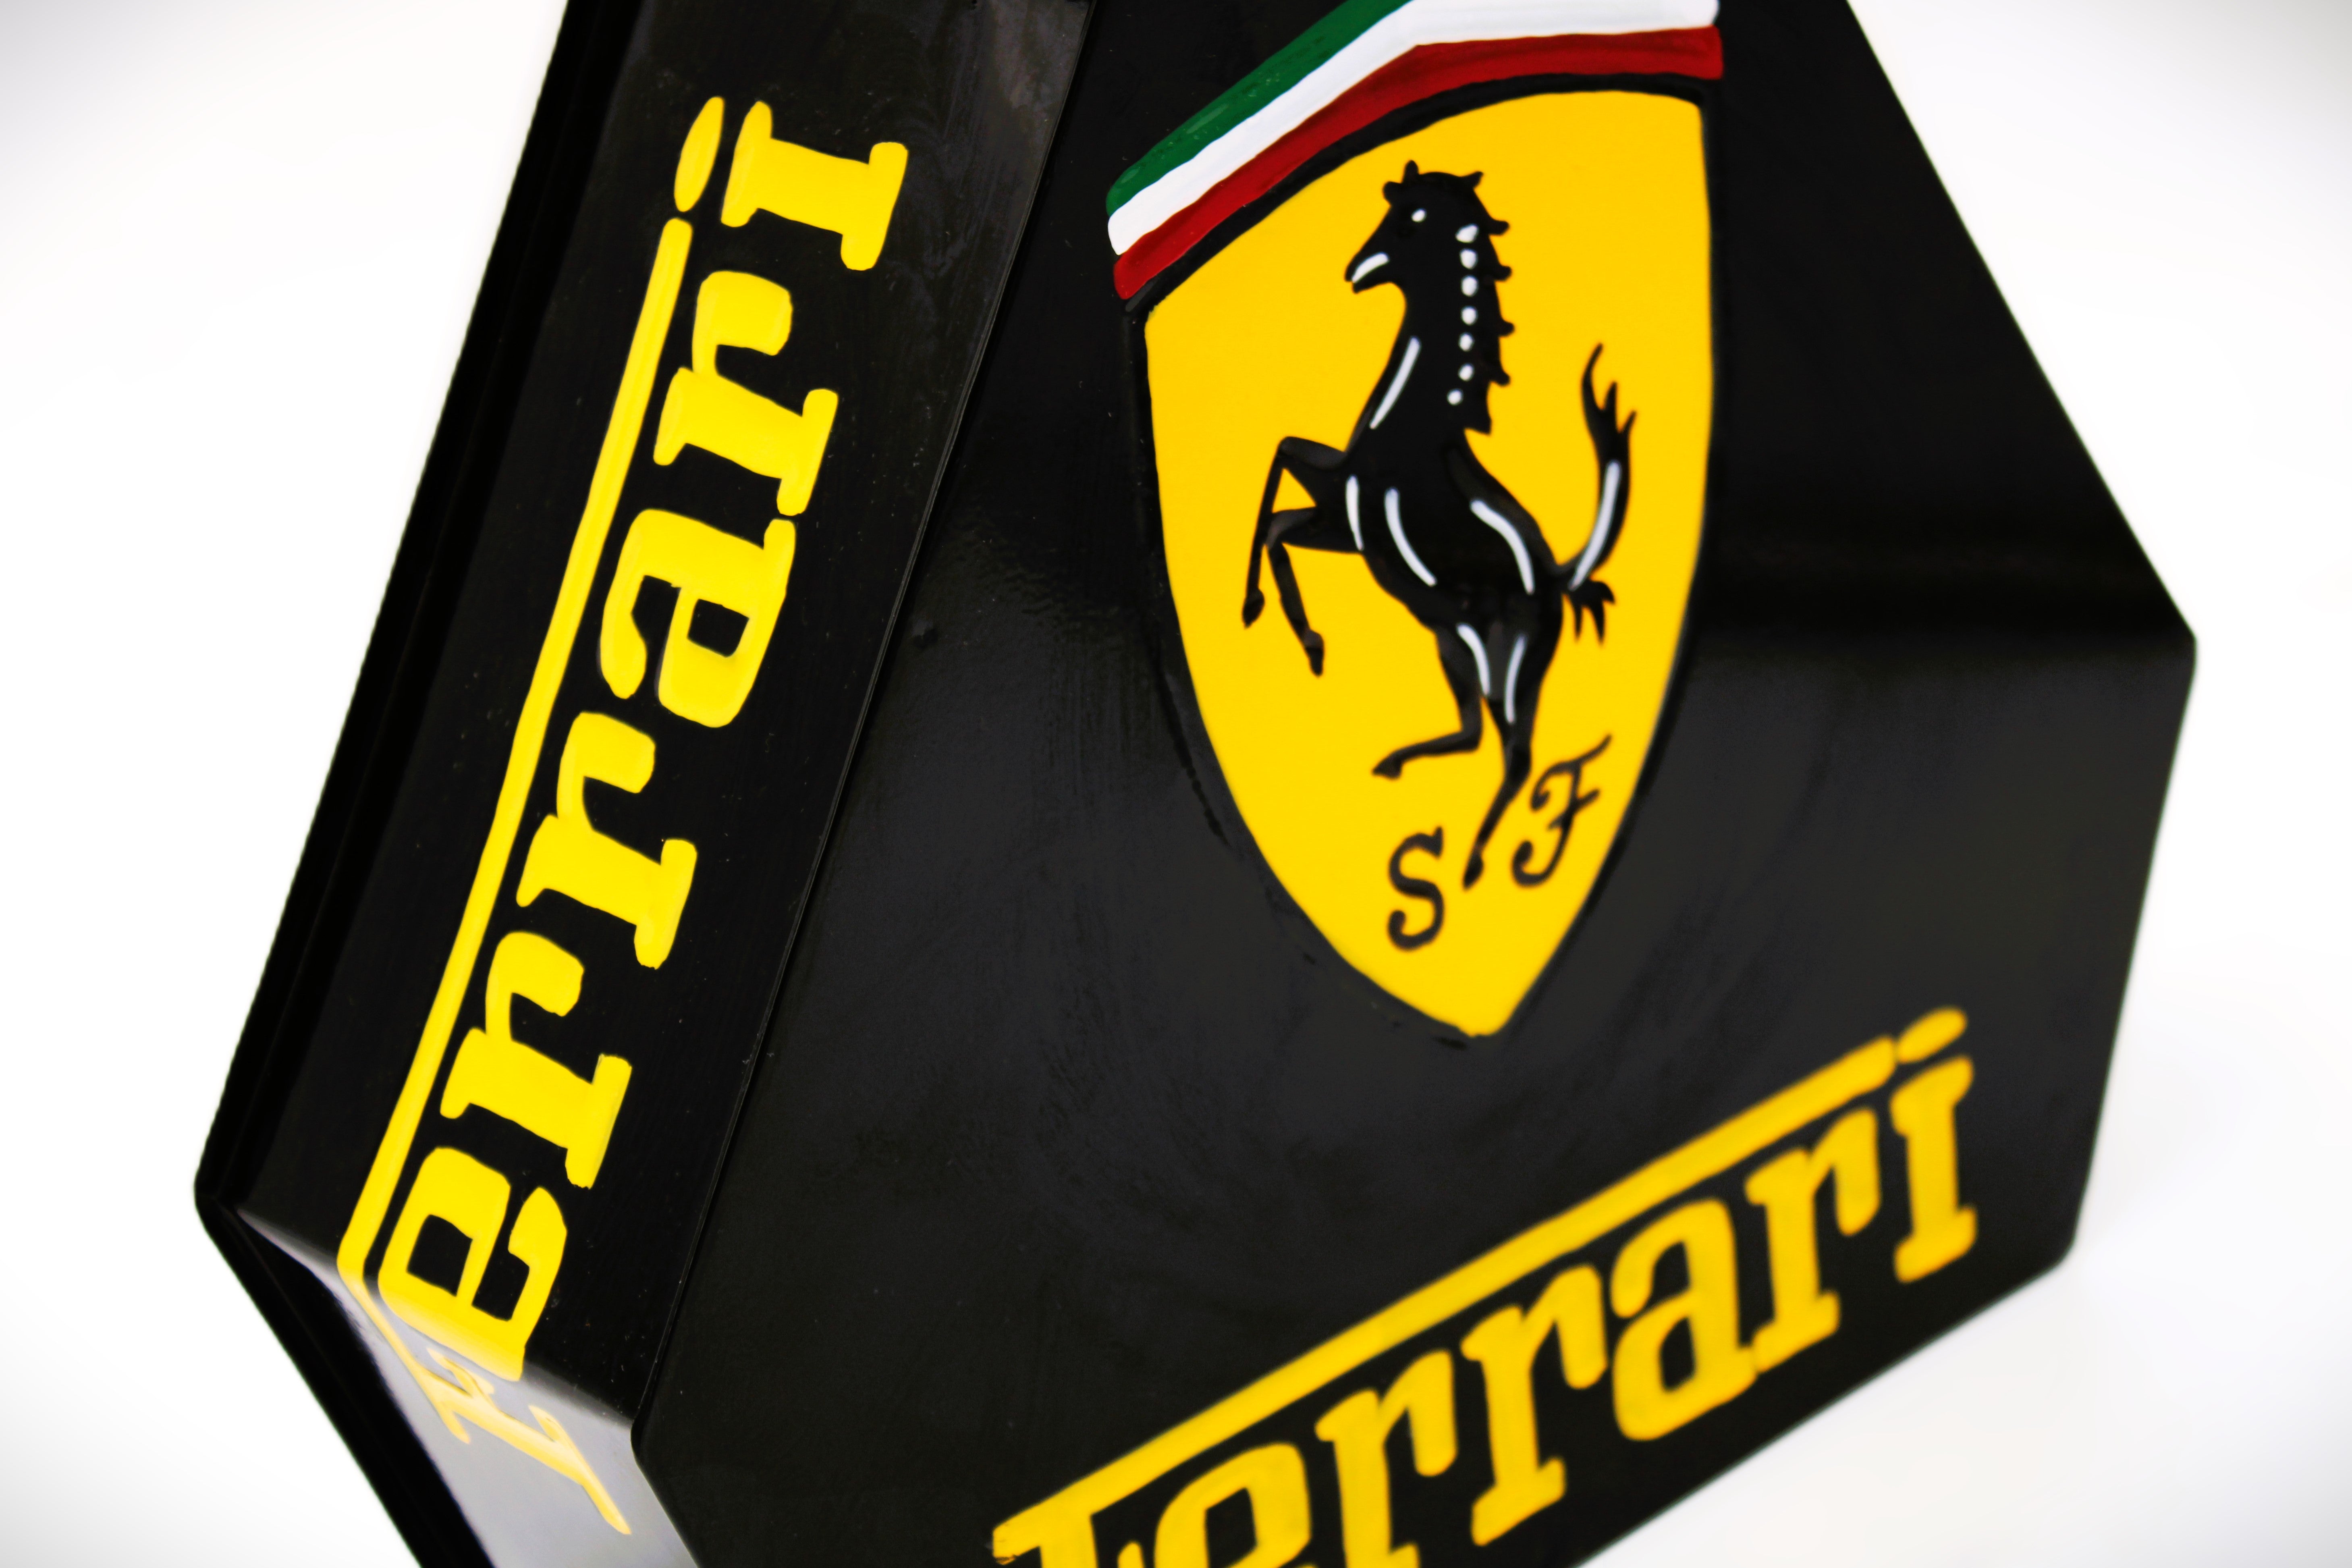 Black and yellow painted gas can with the Ferrari logo displayed on all sides.